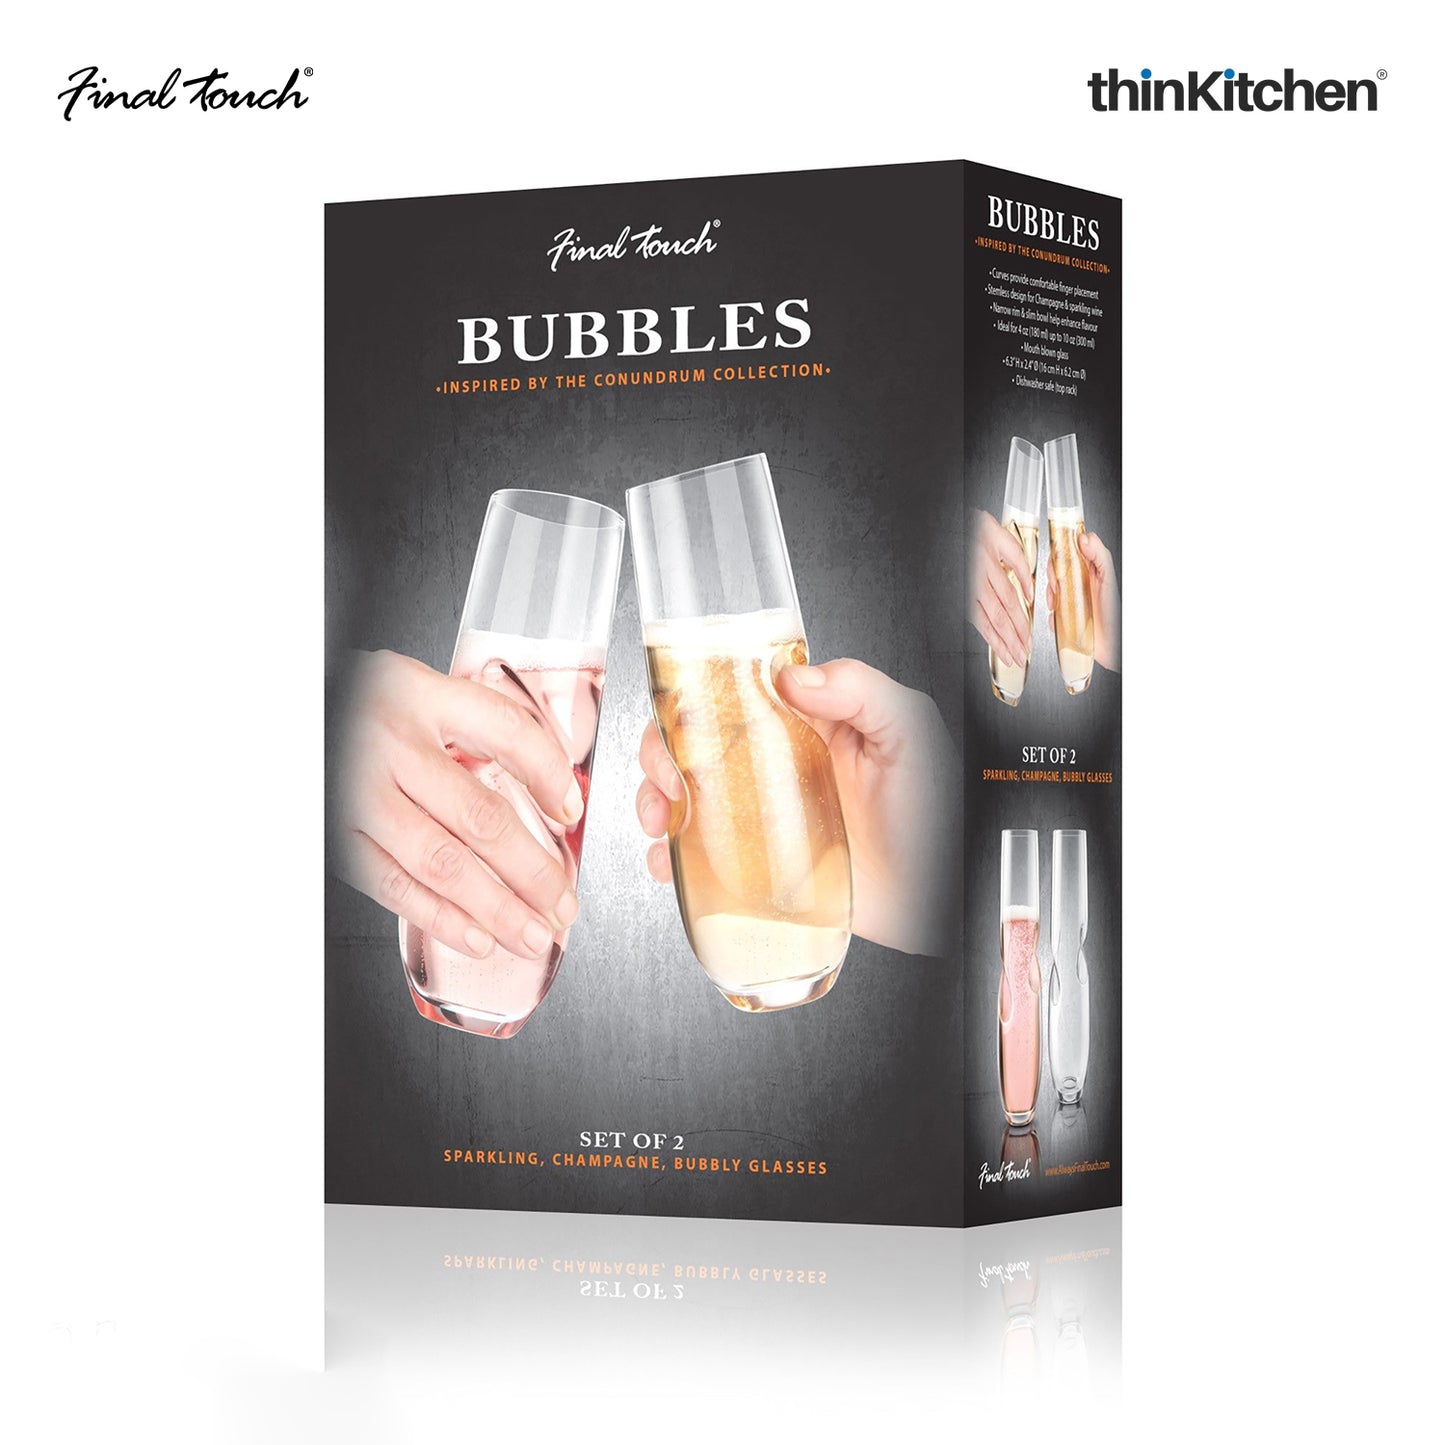 Final Touch Bubbles Sparkling Wine Champagne Stemless Glasses Set Of 2